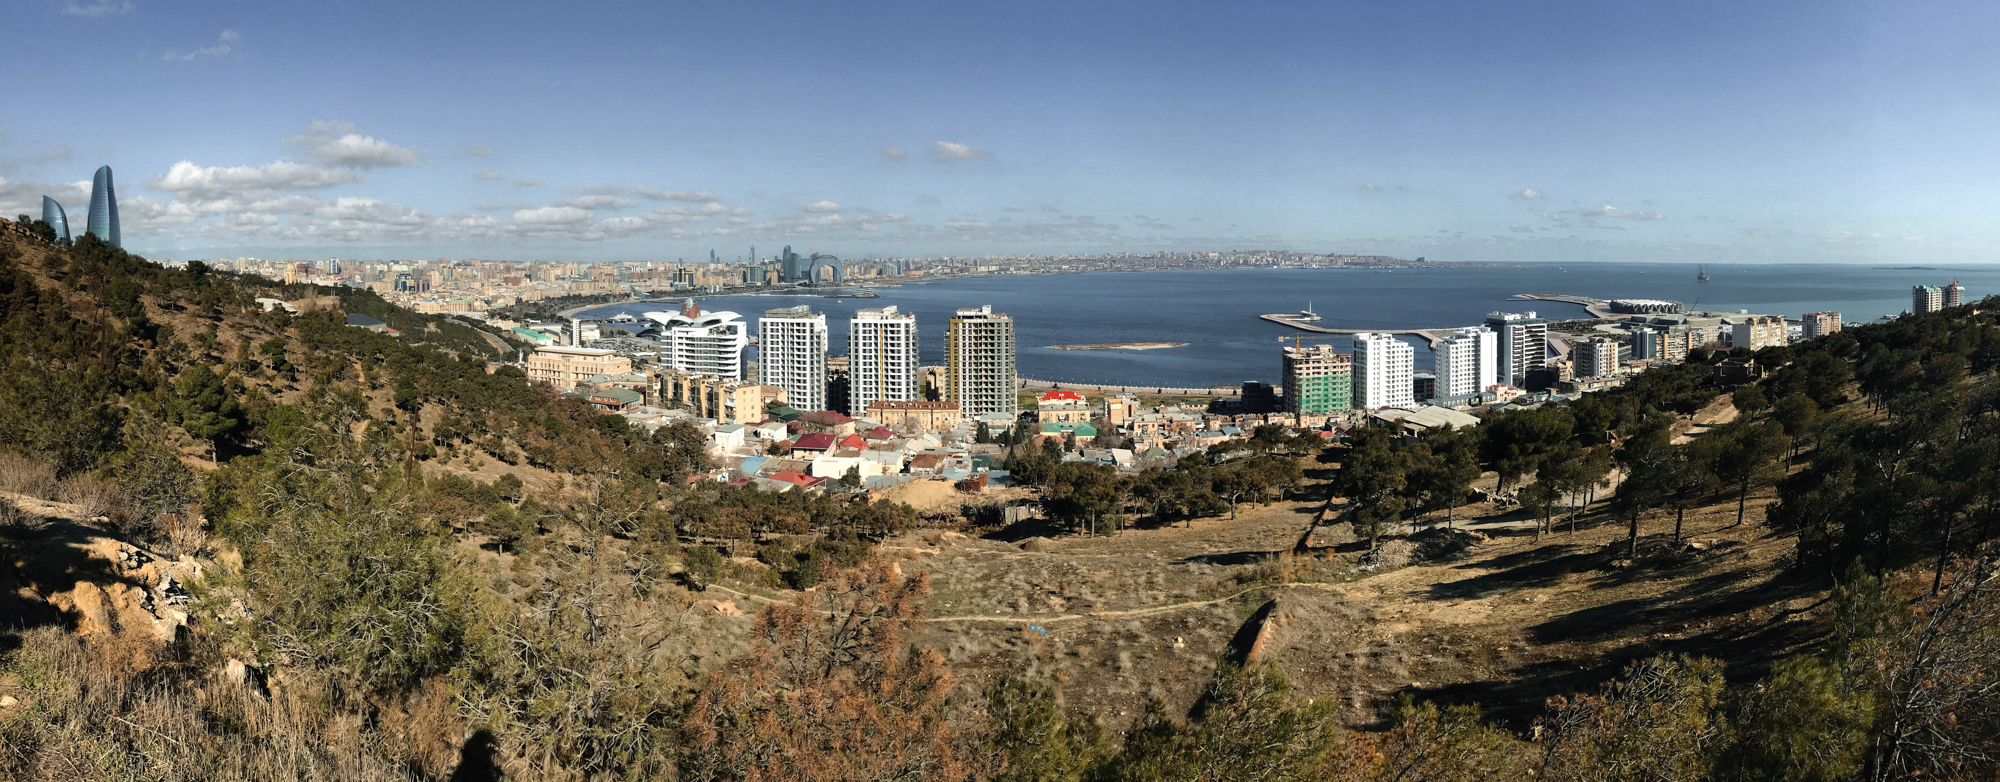 The view from the top of Bayil Hill. On the right is an oil platform; the Flame Towers are on the le ...